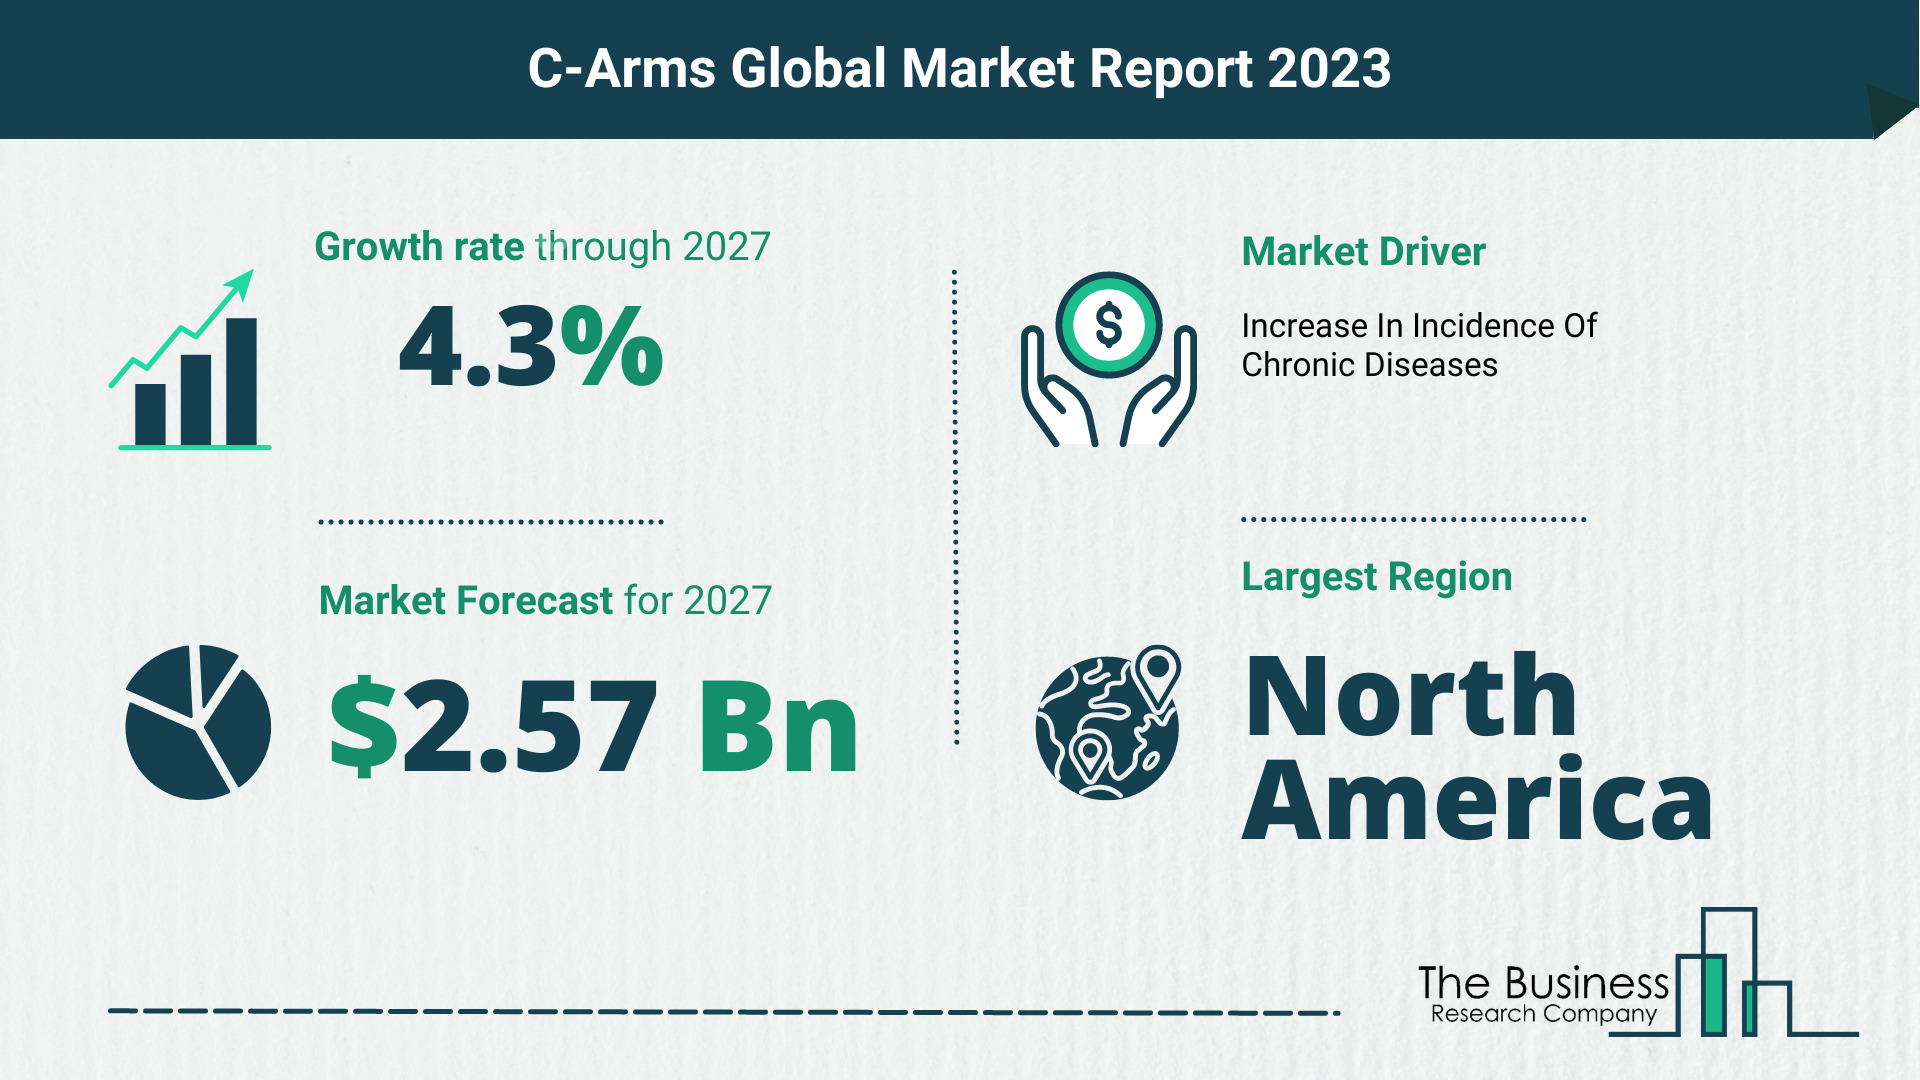 Global C-Arms Market